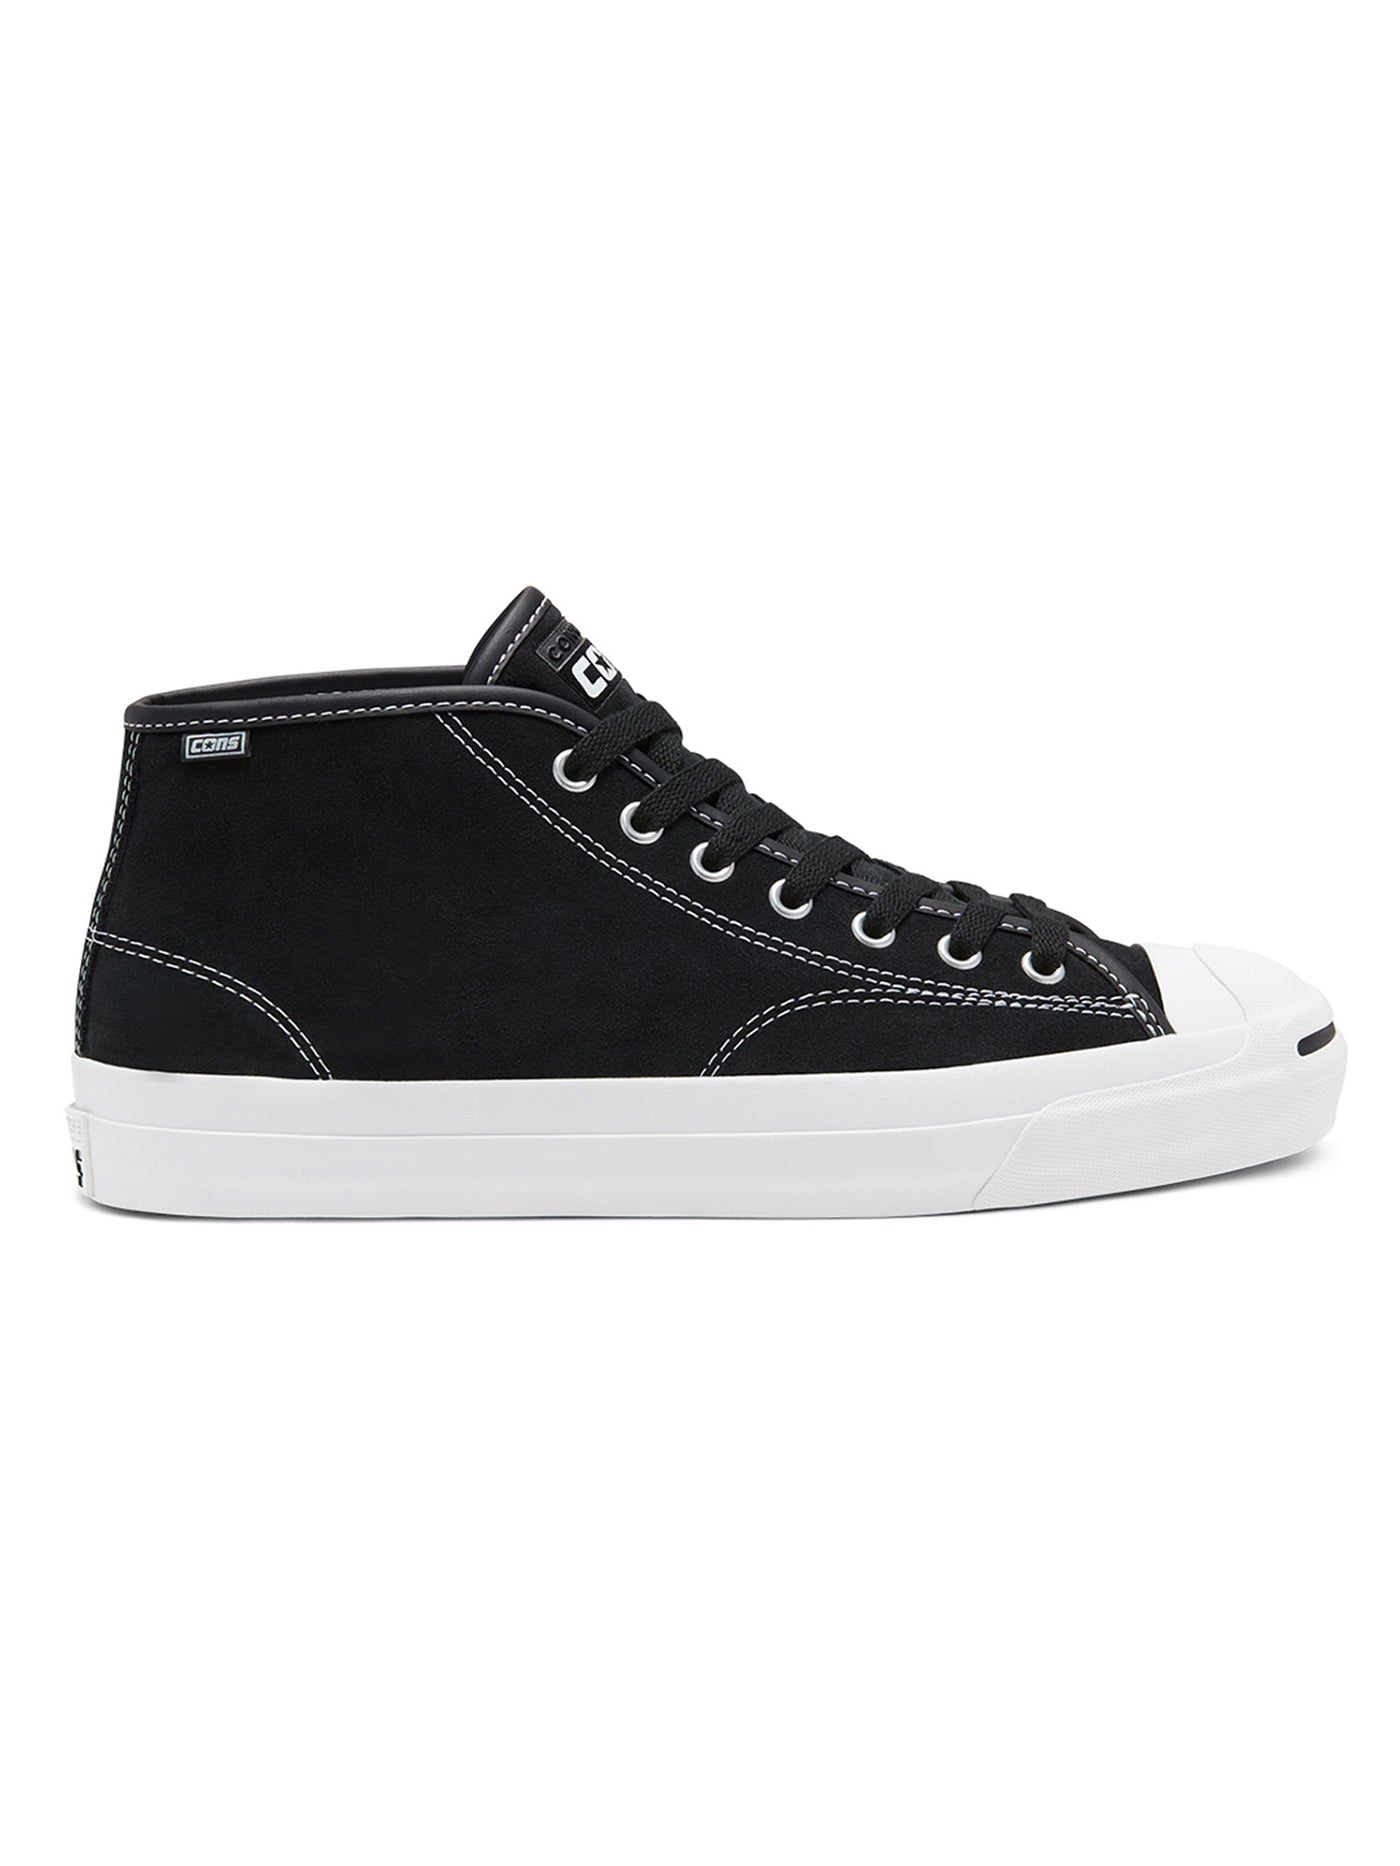 Converse Jack Purcell Pro Mid Black/White/Black Shoes